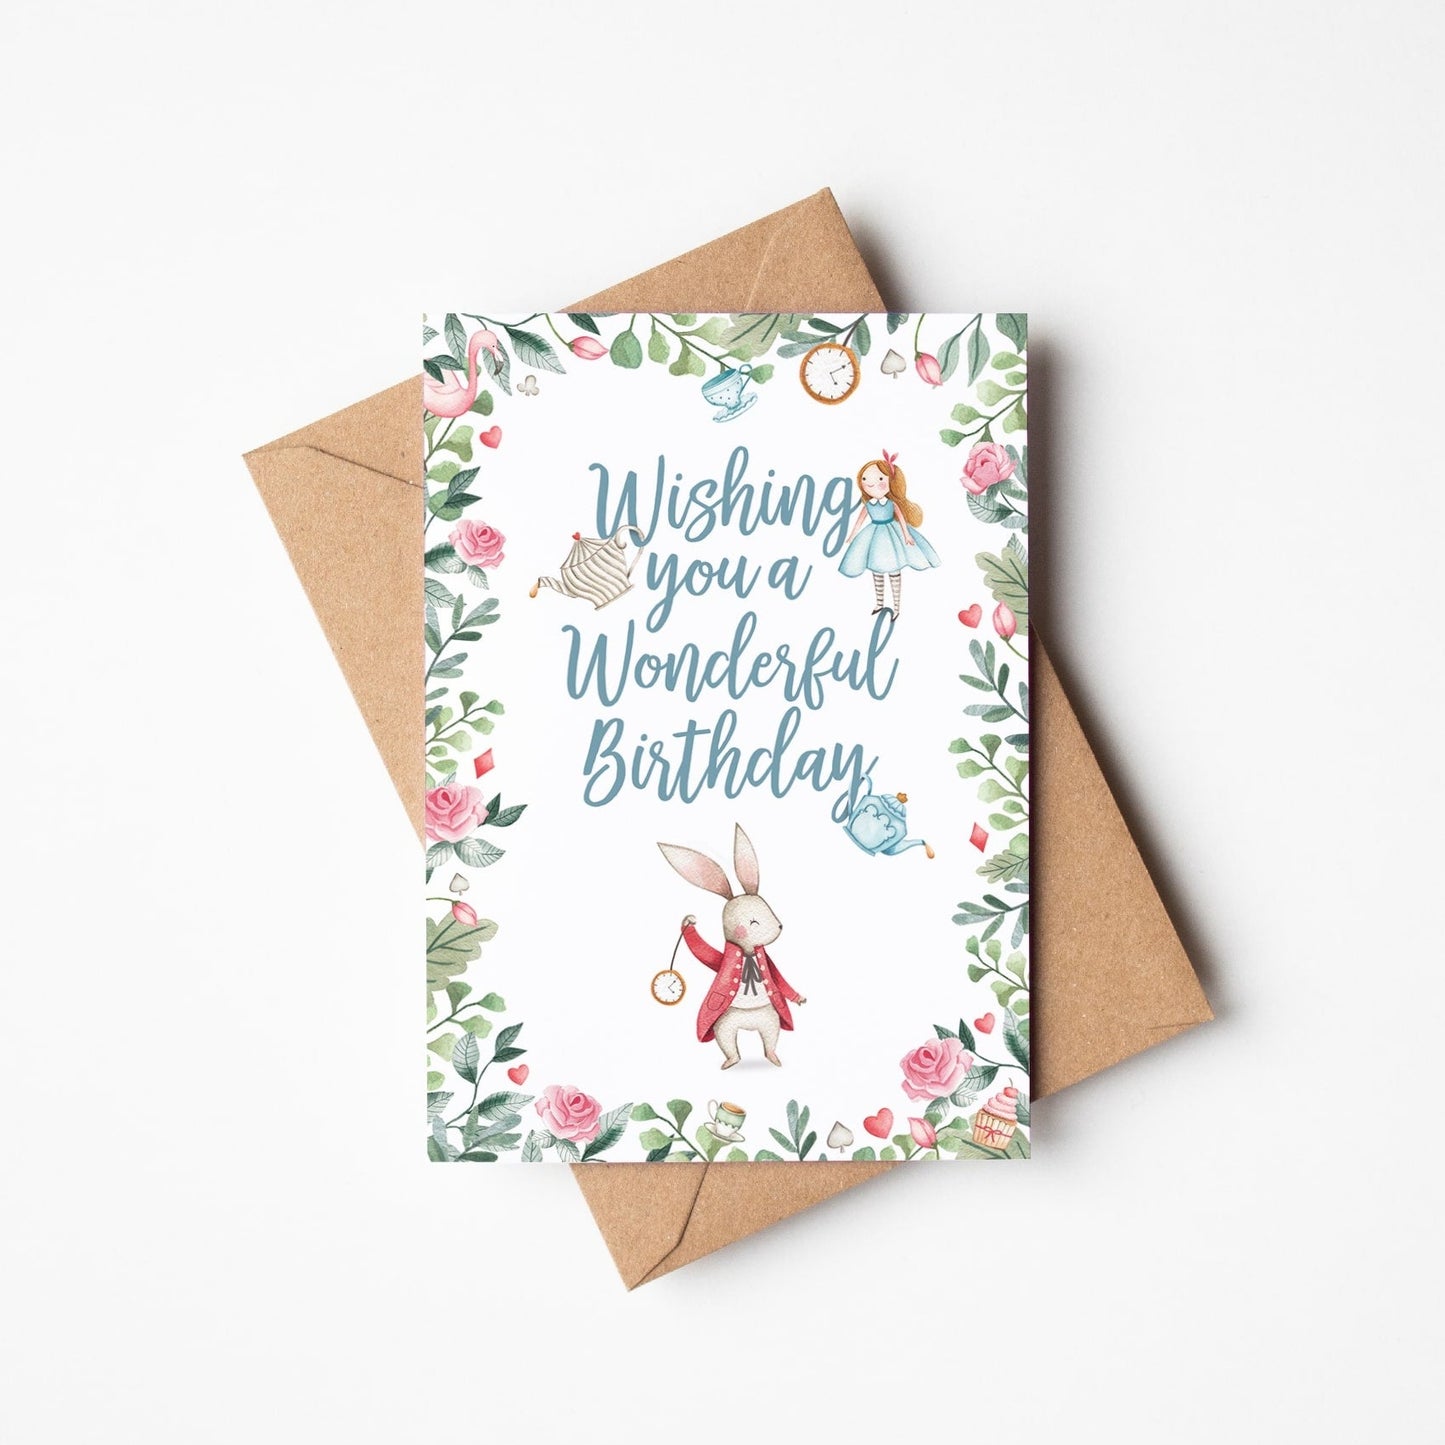 Alice in wonderland birthday card with blue text